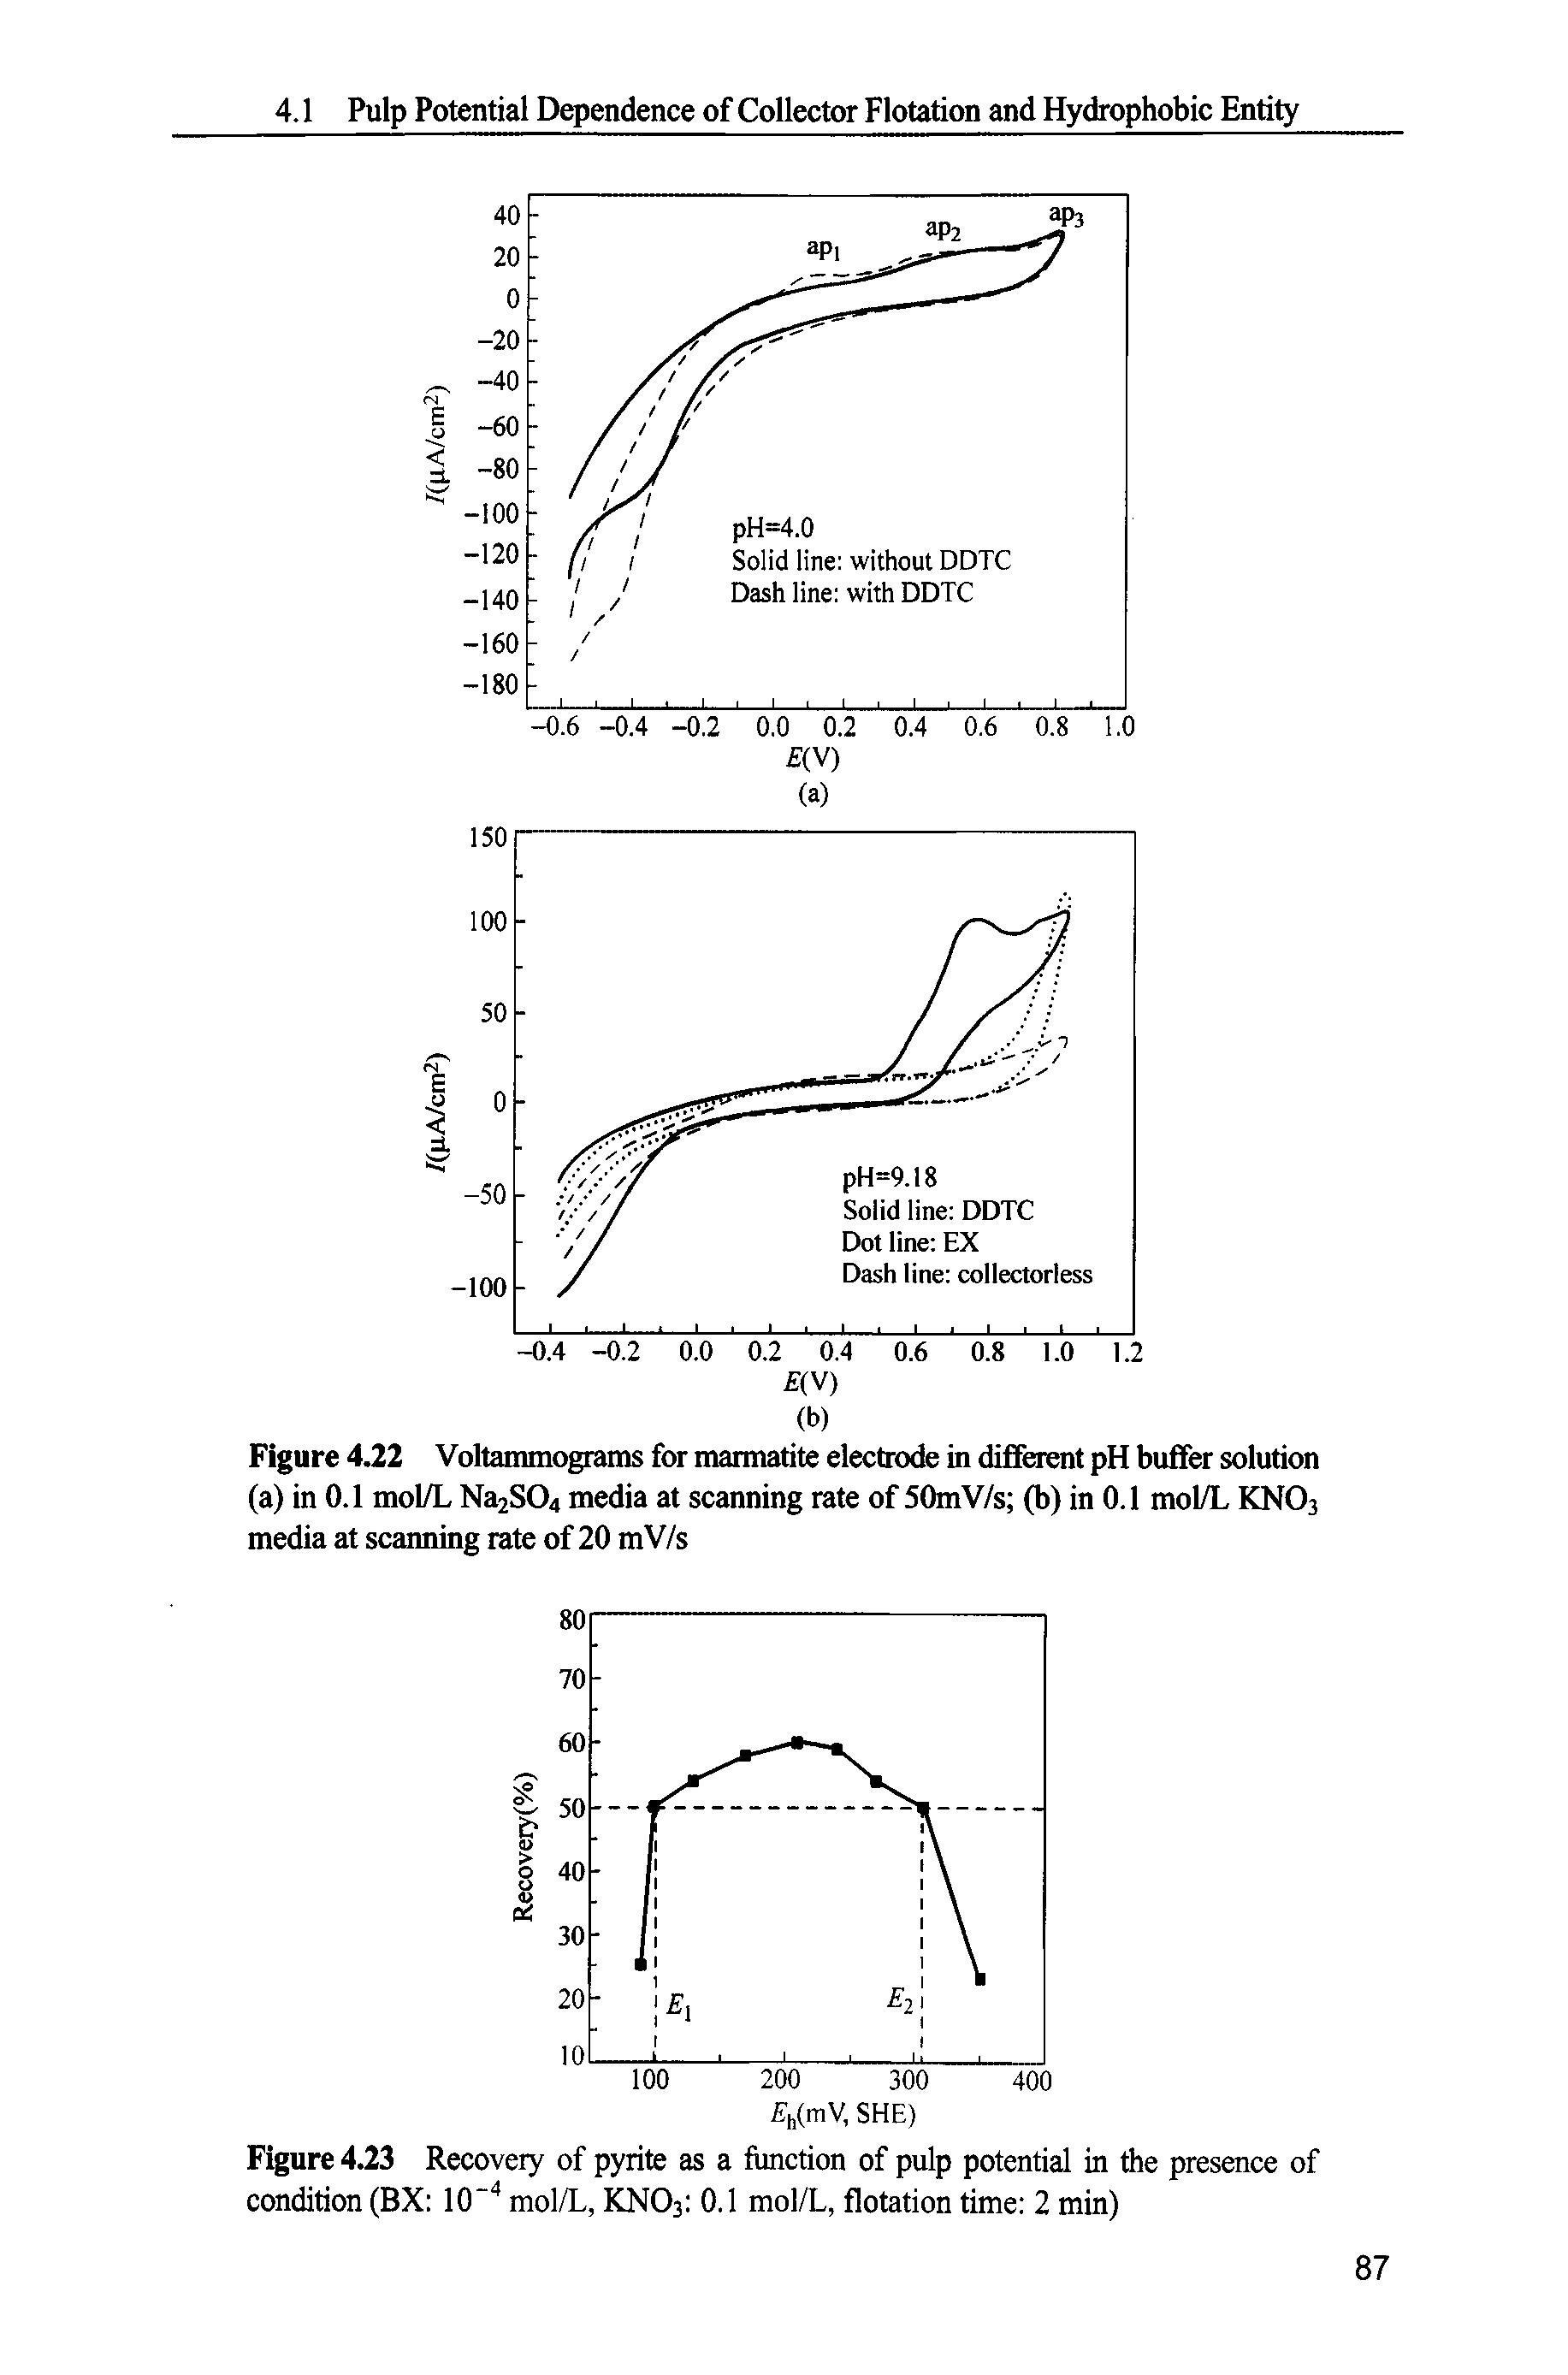 Figure 4.23 Recovery of pyrite as a function of pulp potential in the presence of condition (BX 10 mol/L, KNO3 0.1 mol/L, flotation time 2 min)...